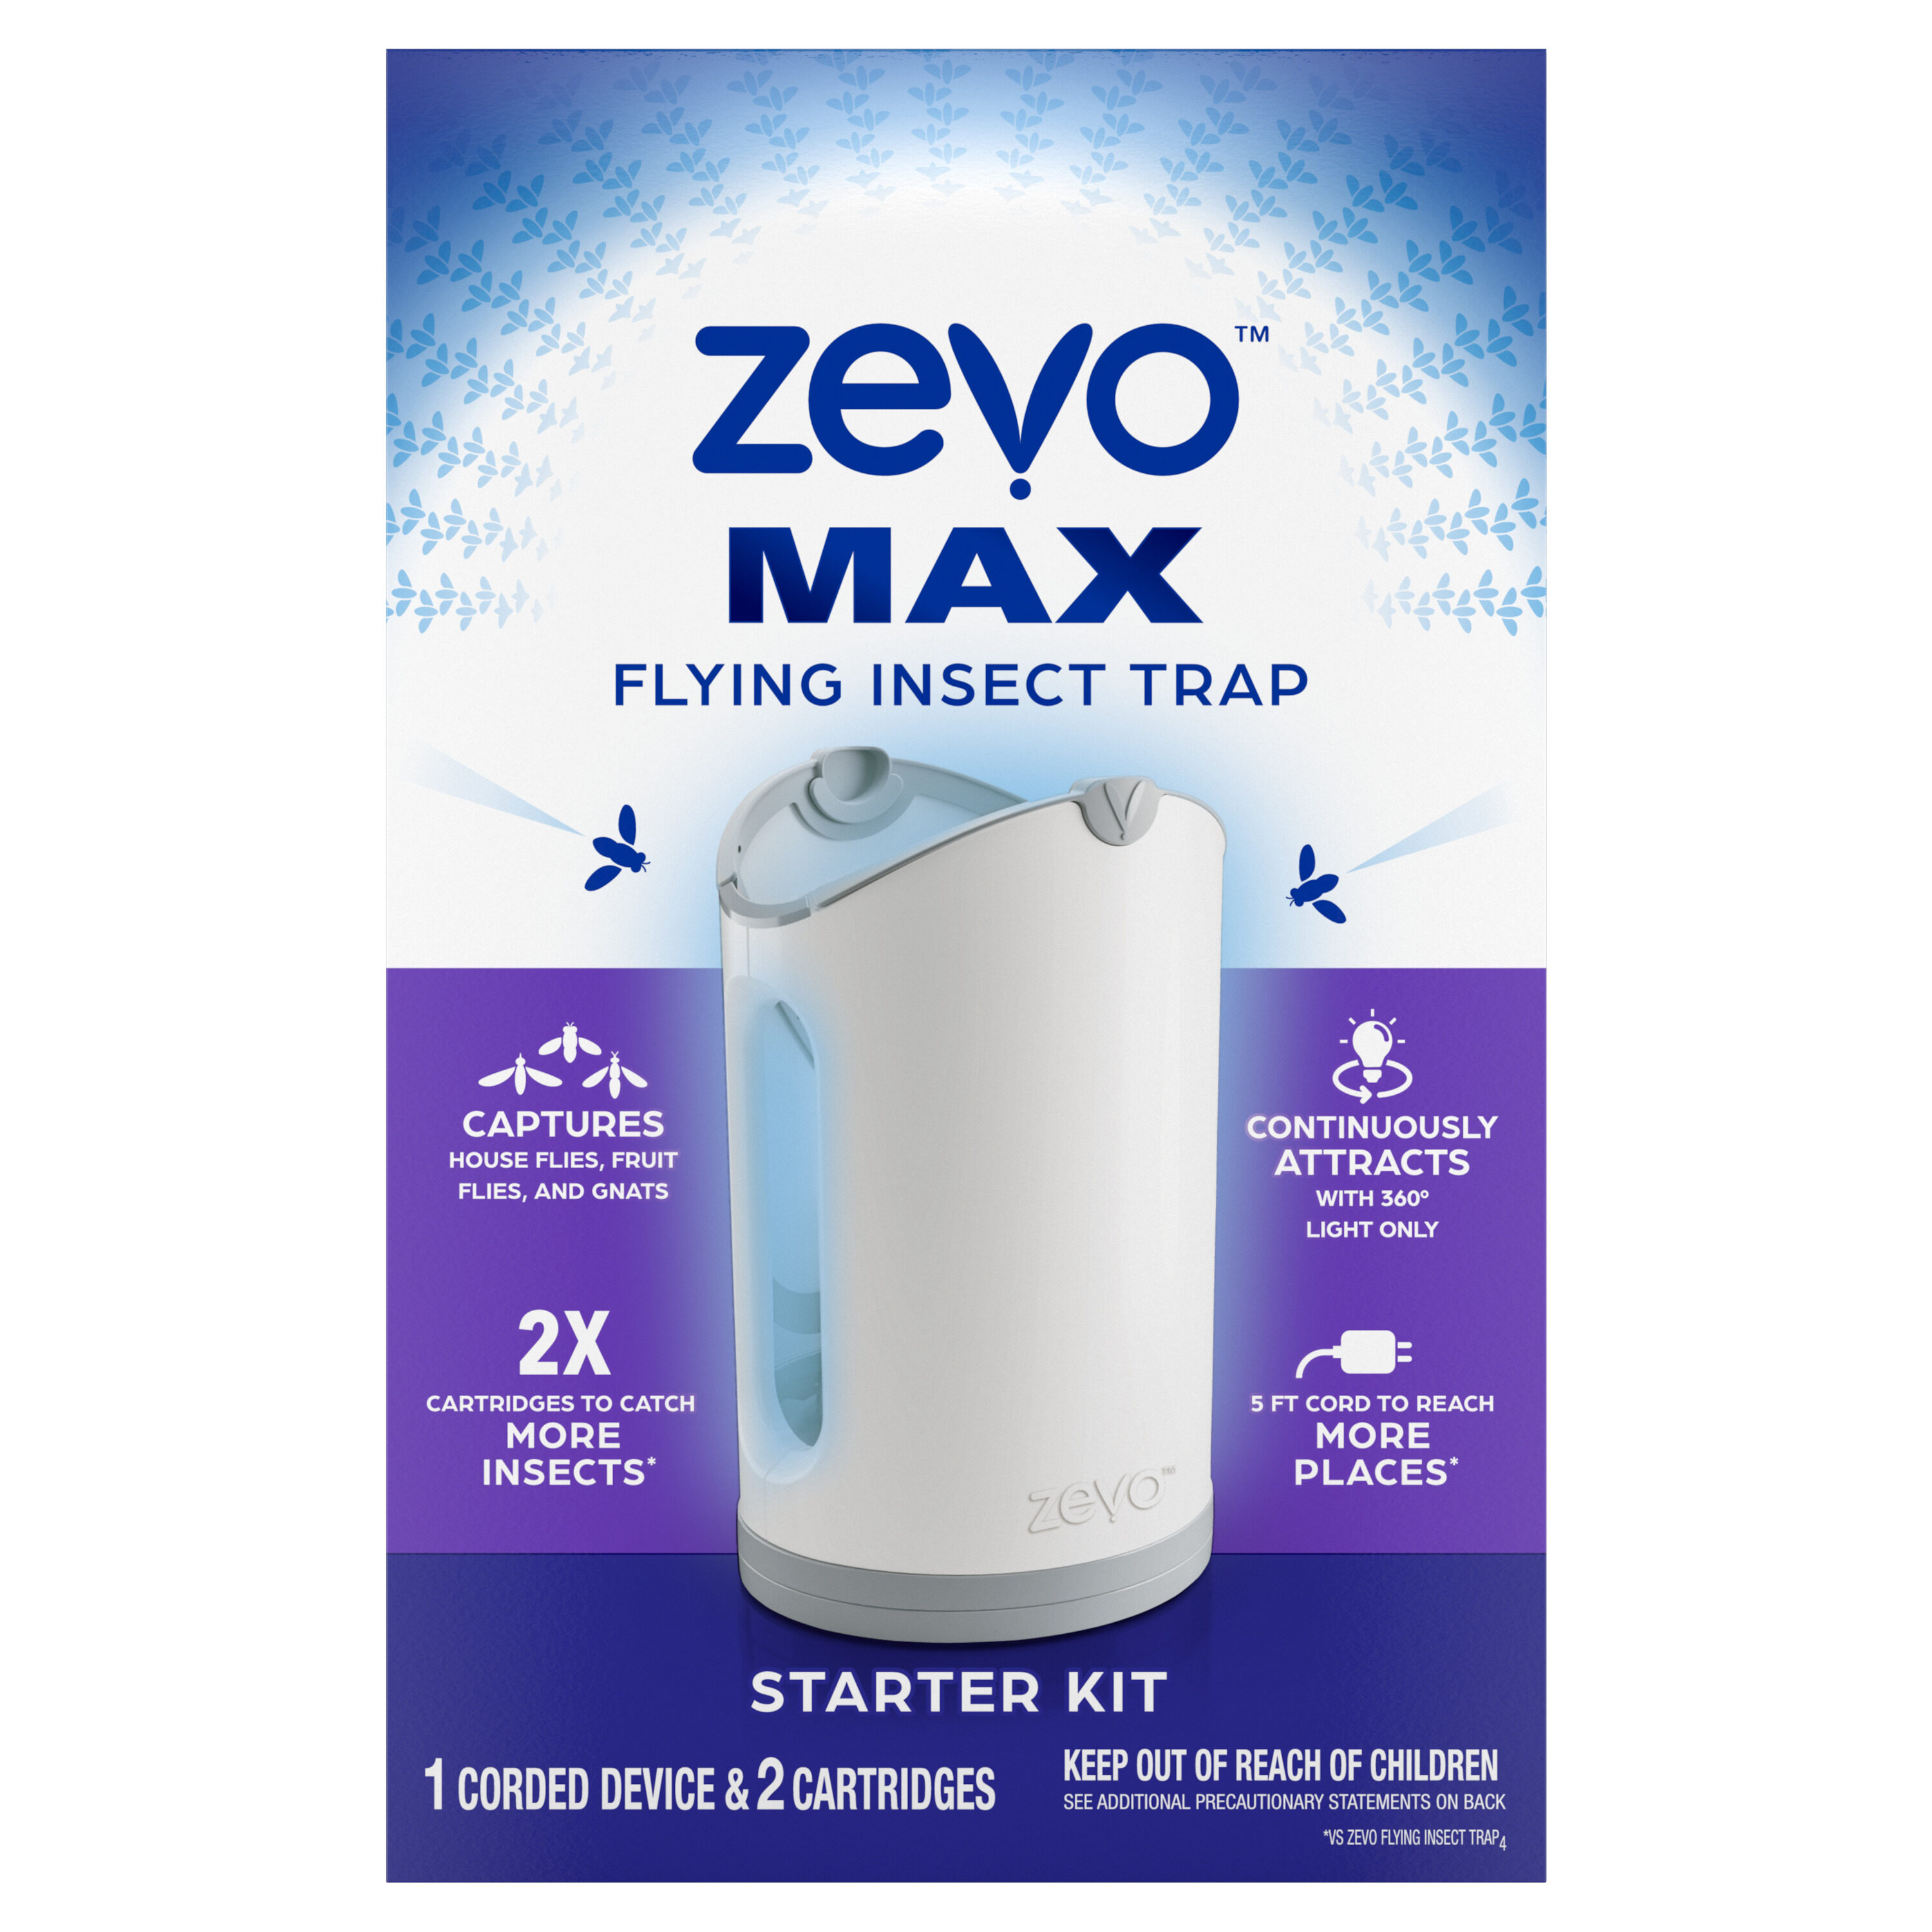 ZEVO Indoor Flying Insect Trap Refill Cartridges (2 Refill